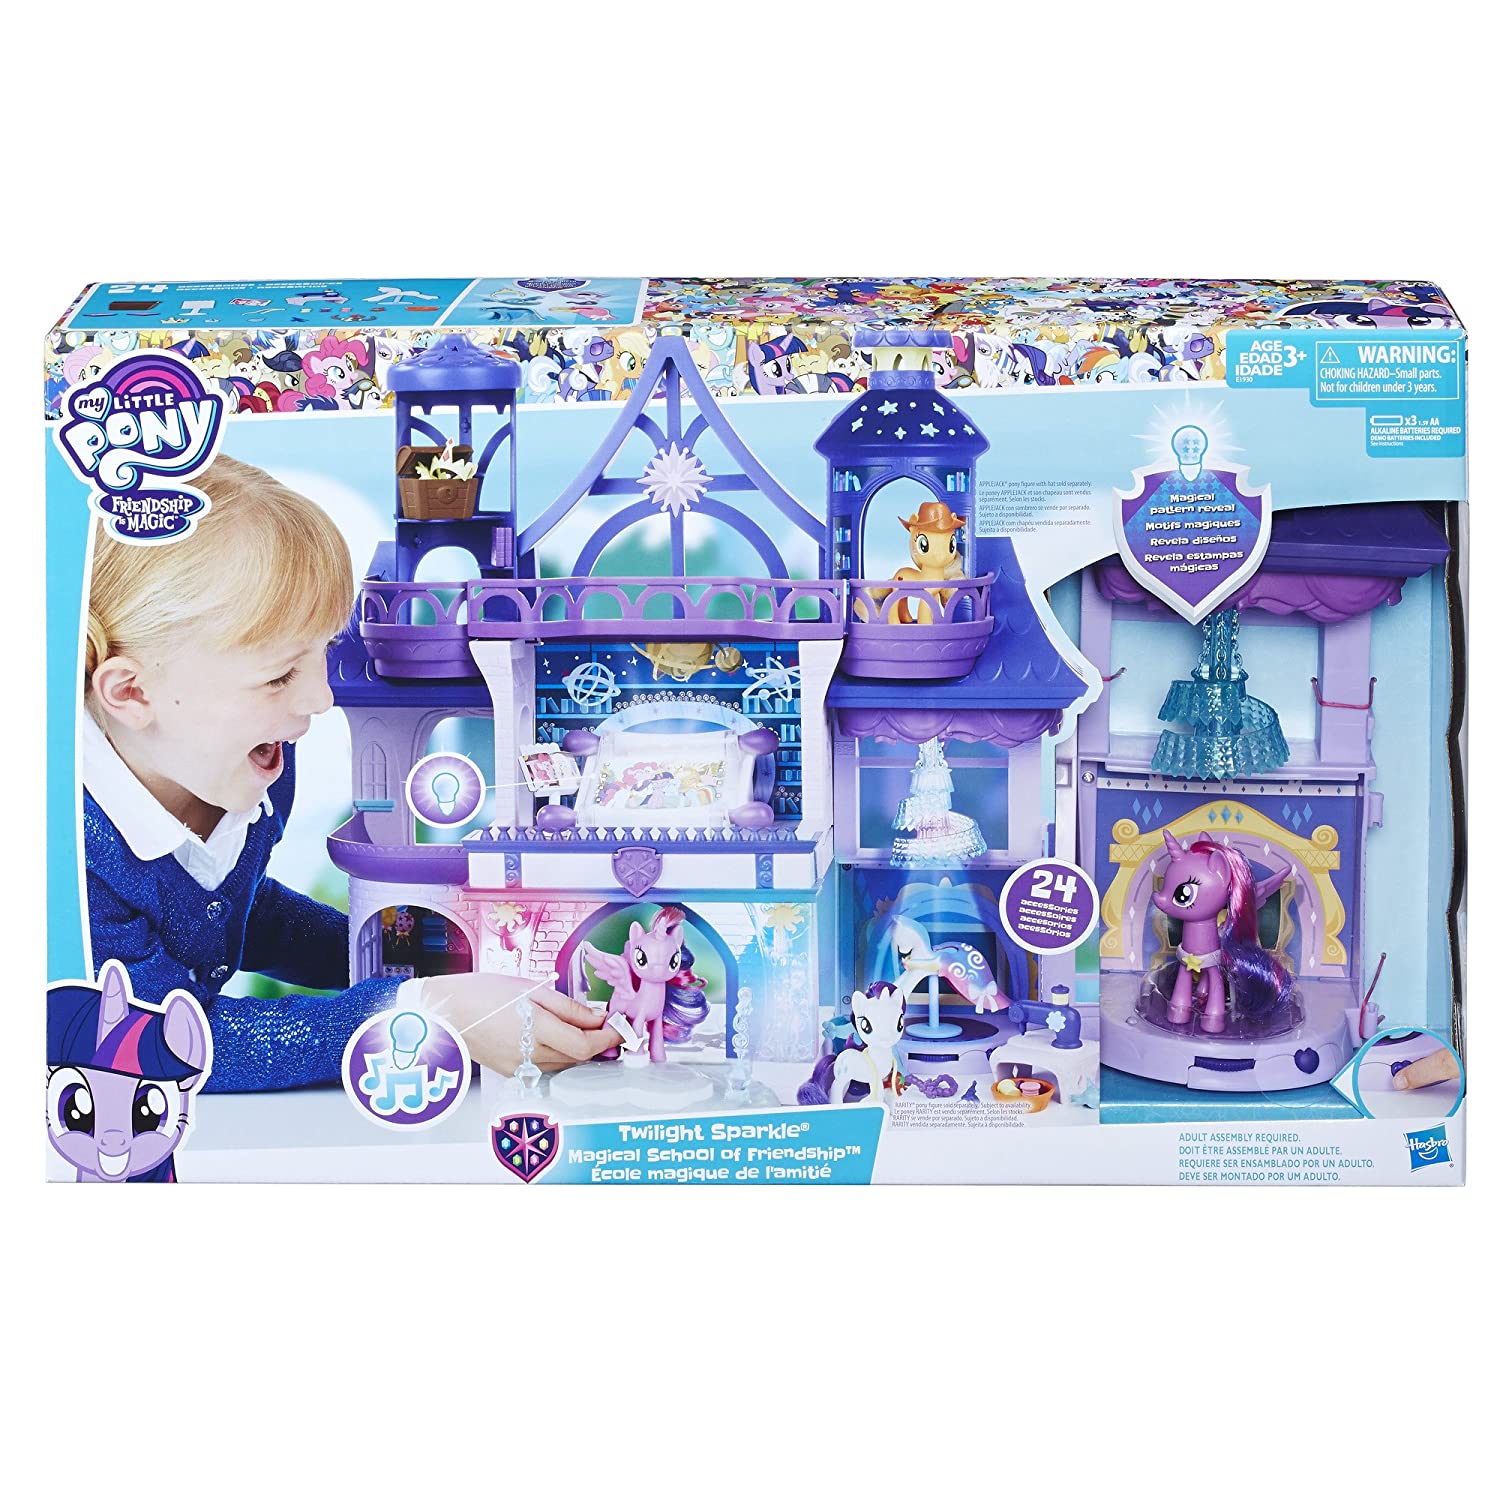 Top 11 Best My Little Pony Toys Reviews in 2023 7